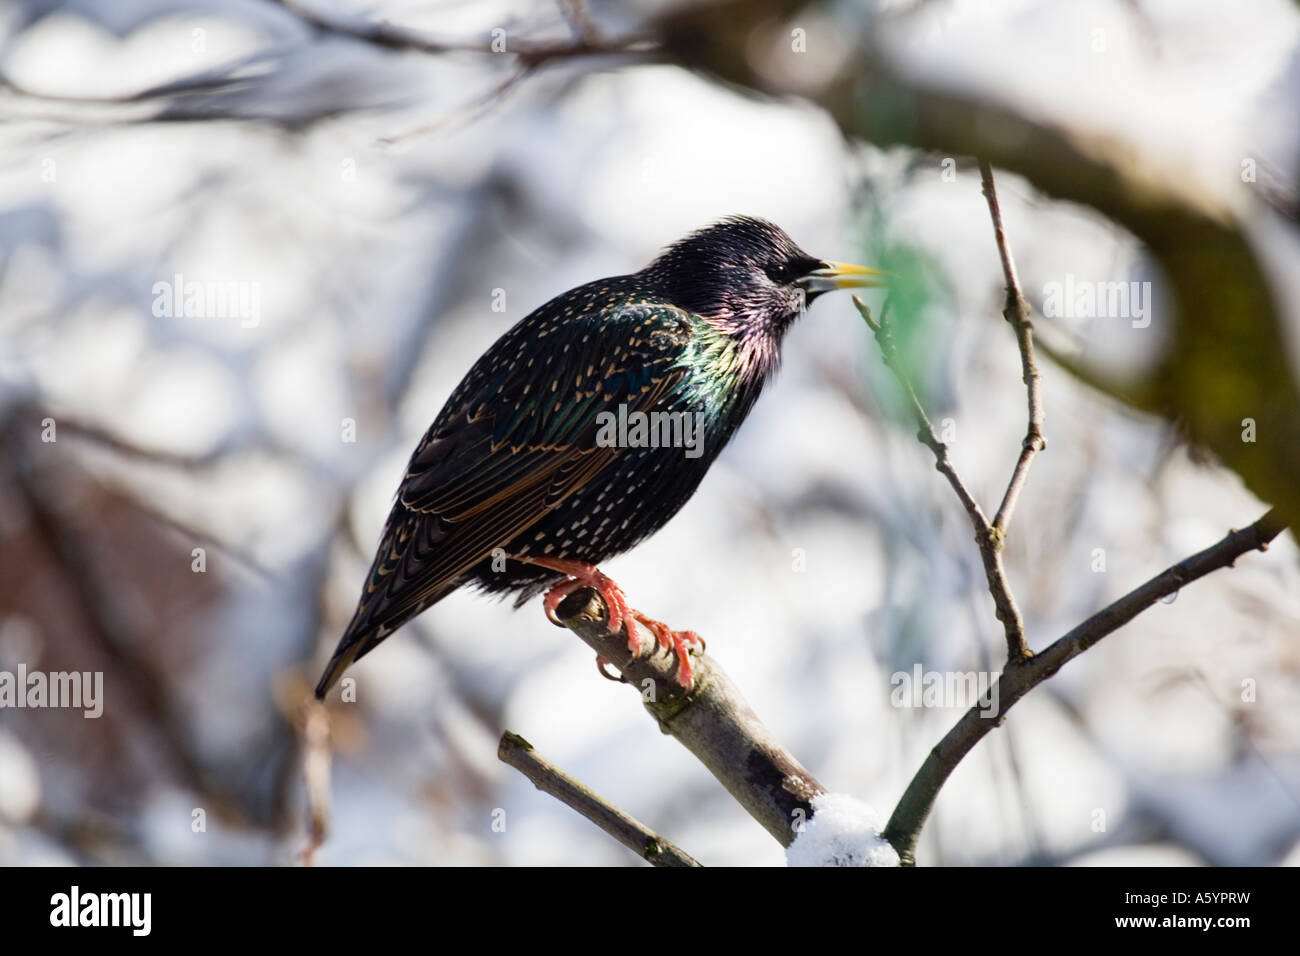 Starling sturnus vulgaris sitting on a tree in the sun with snow in background Stock Photo